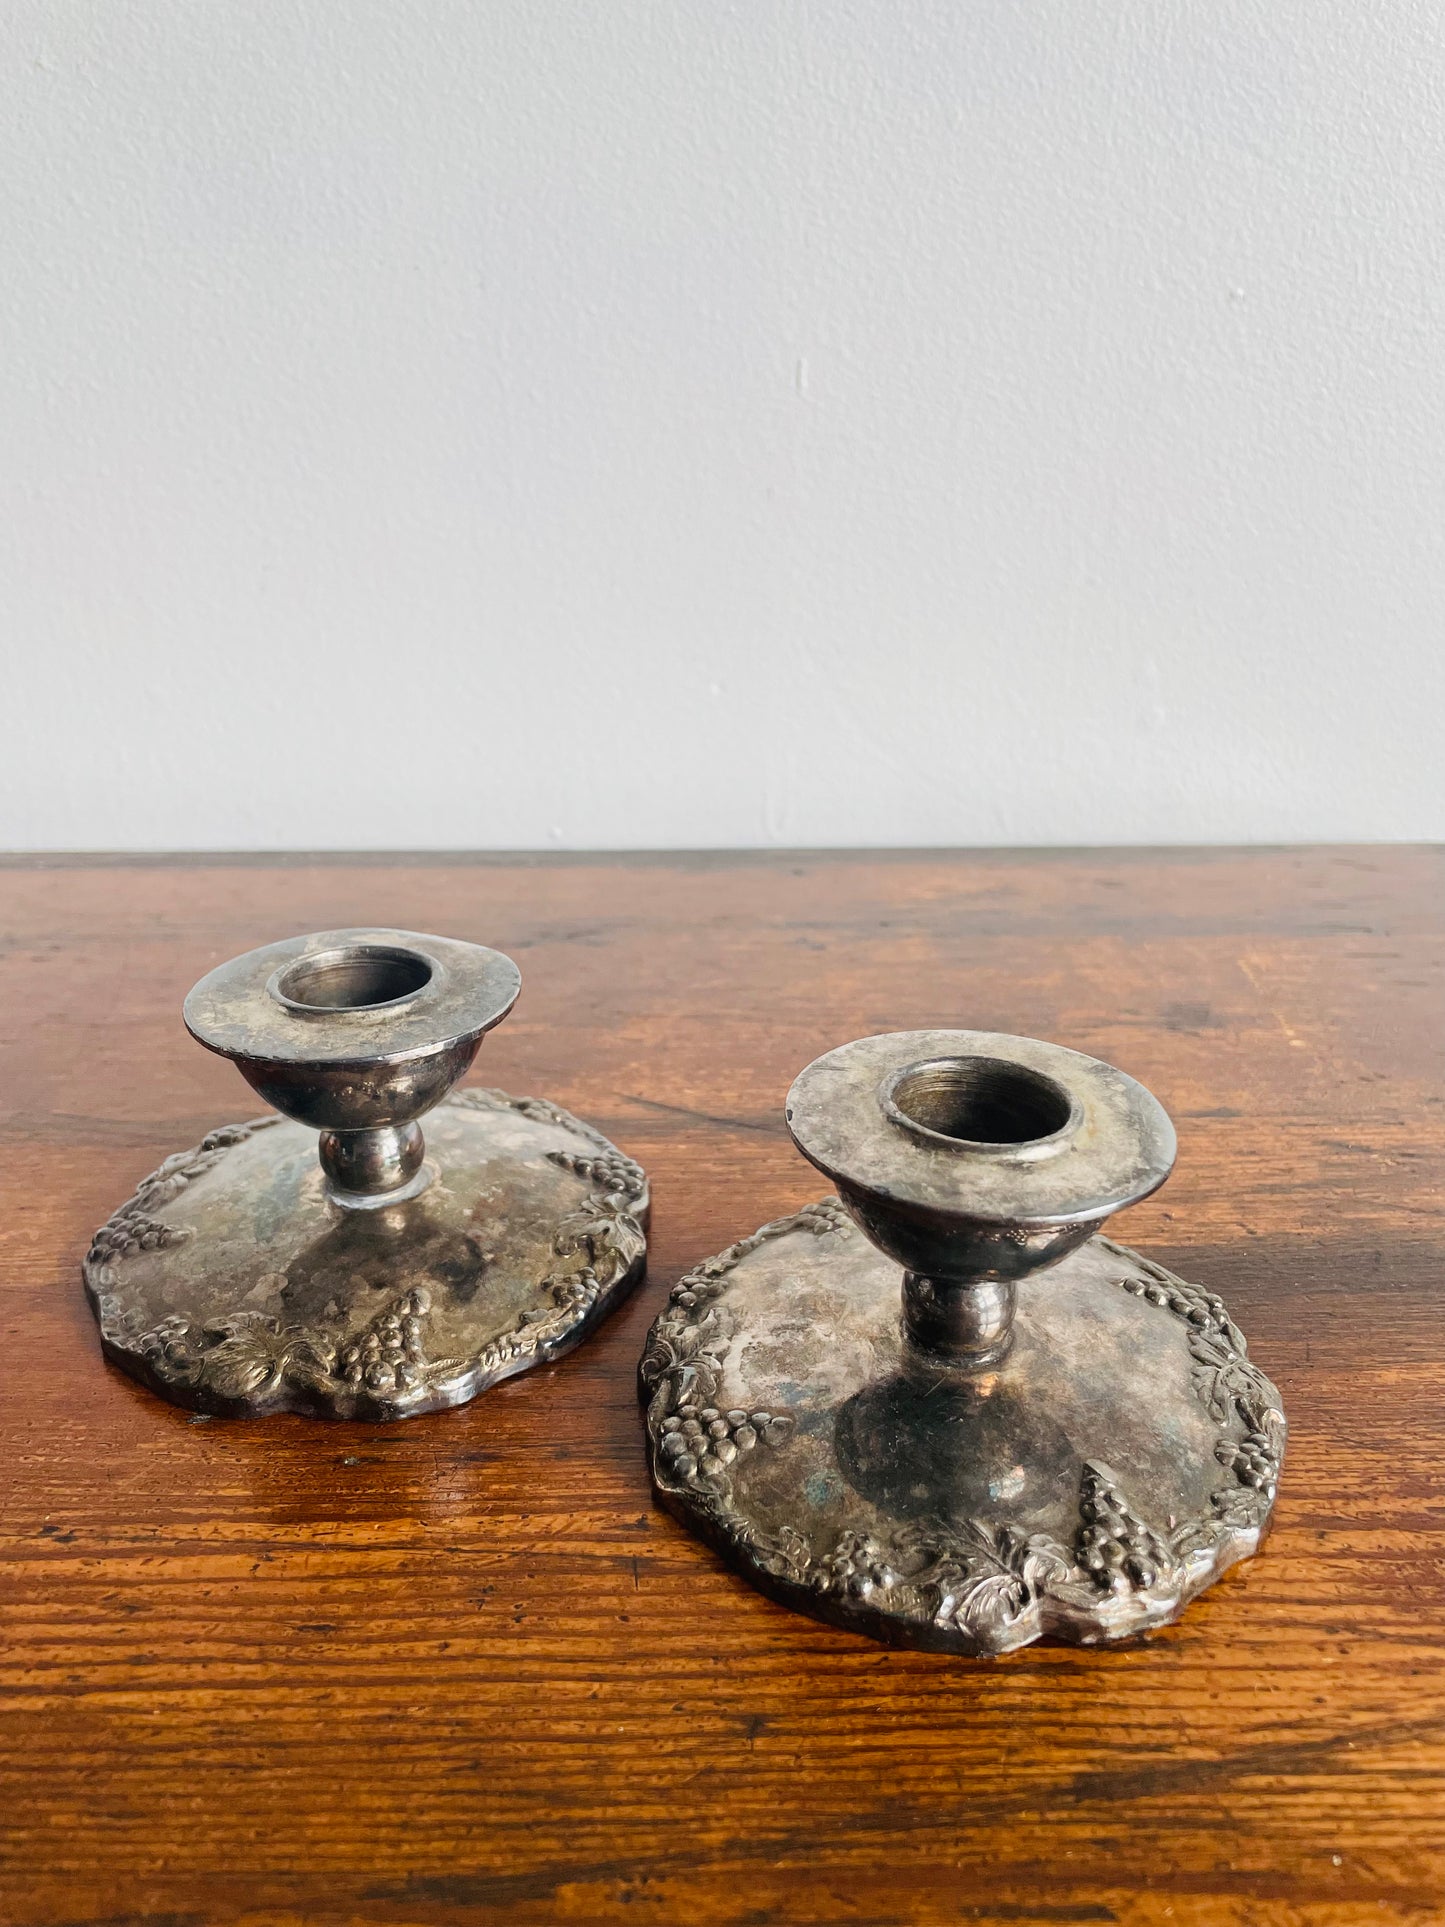 EP Lead Candlestick Holders with Grape Clusters & Vine Design - Set of 2